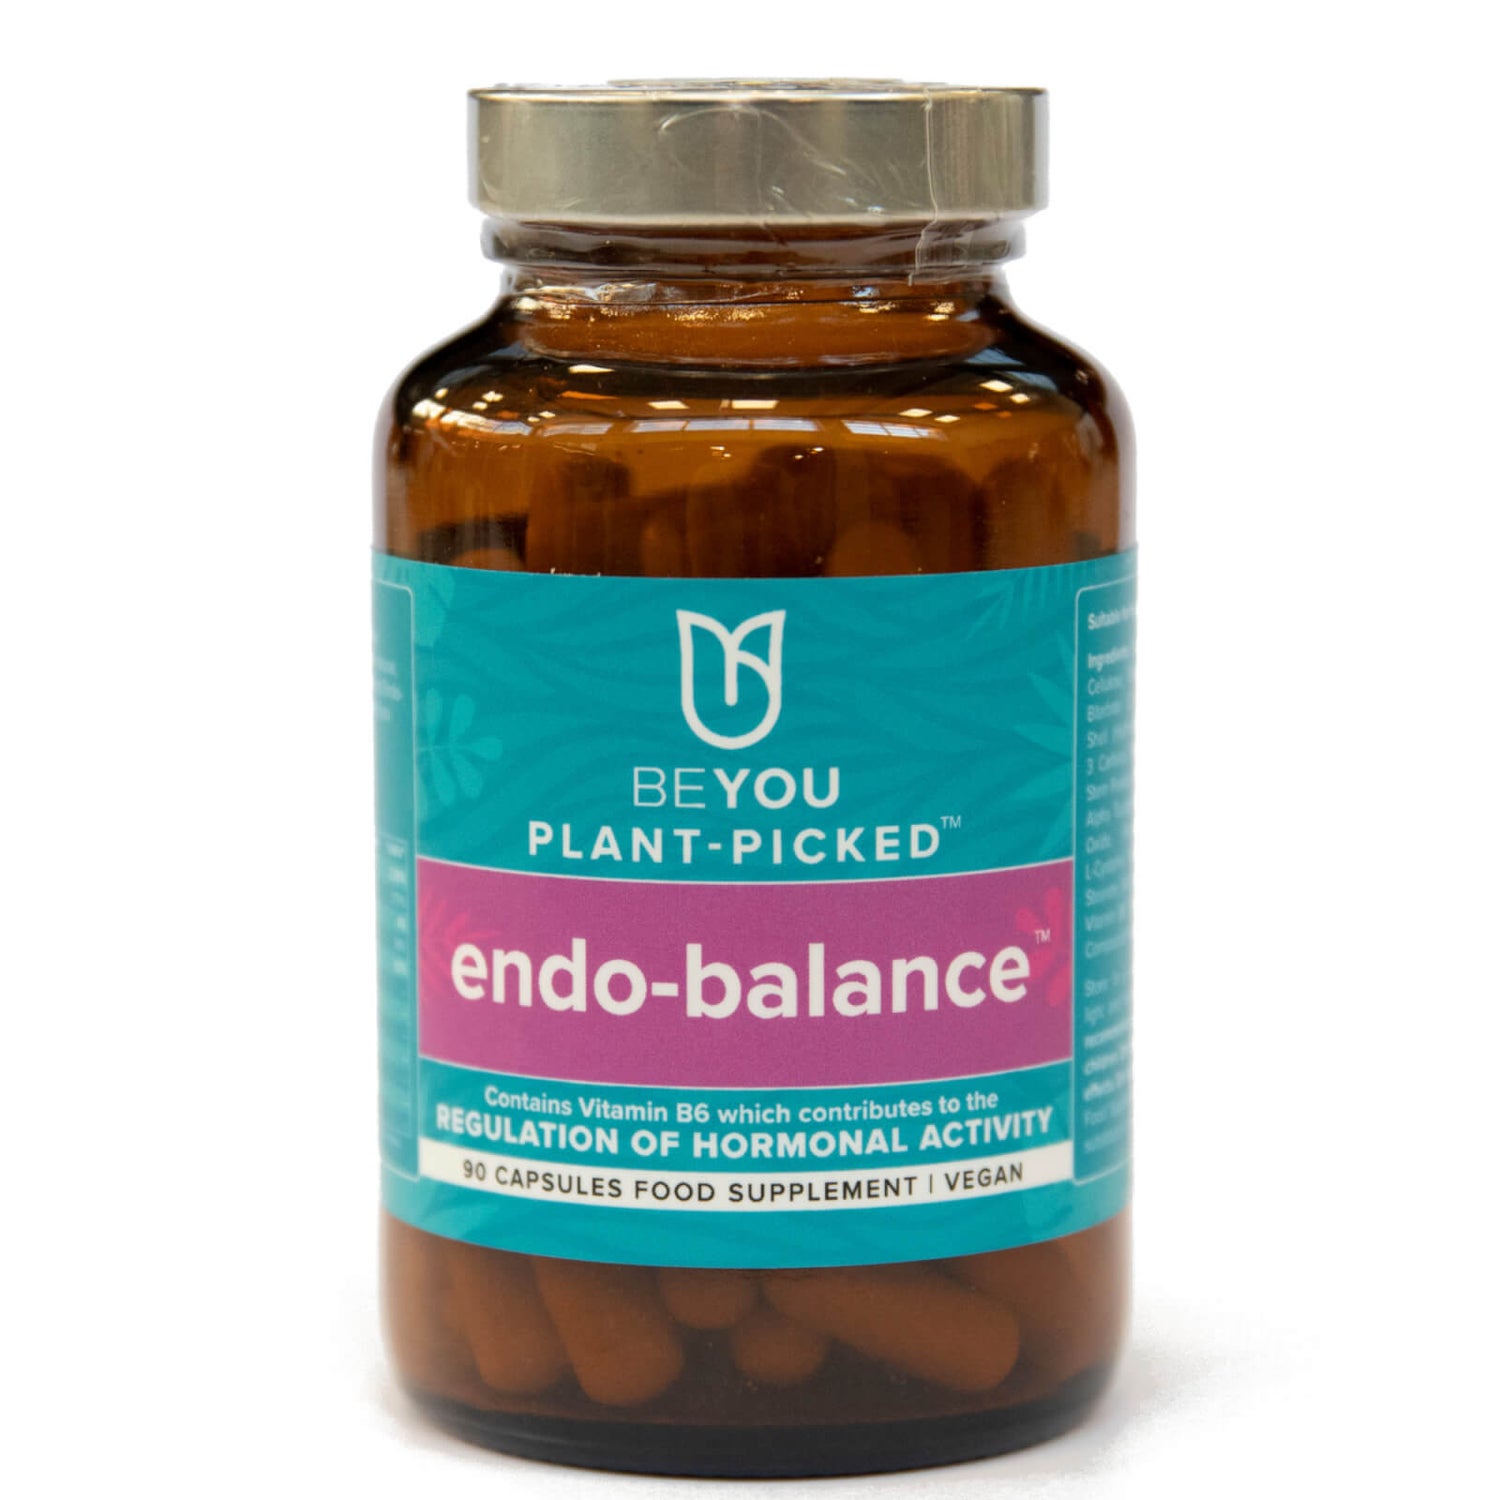 BeYou Endo-Balance Vitamin Supplements (Monthly Supply)